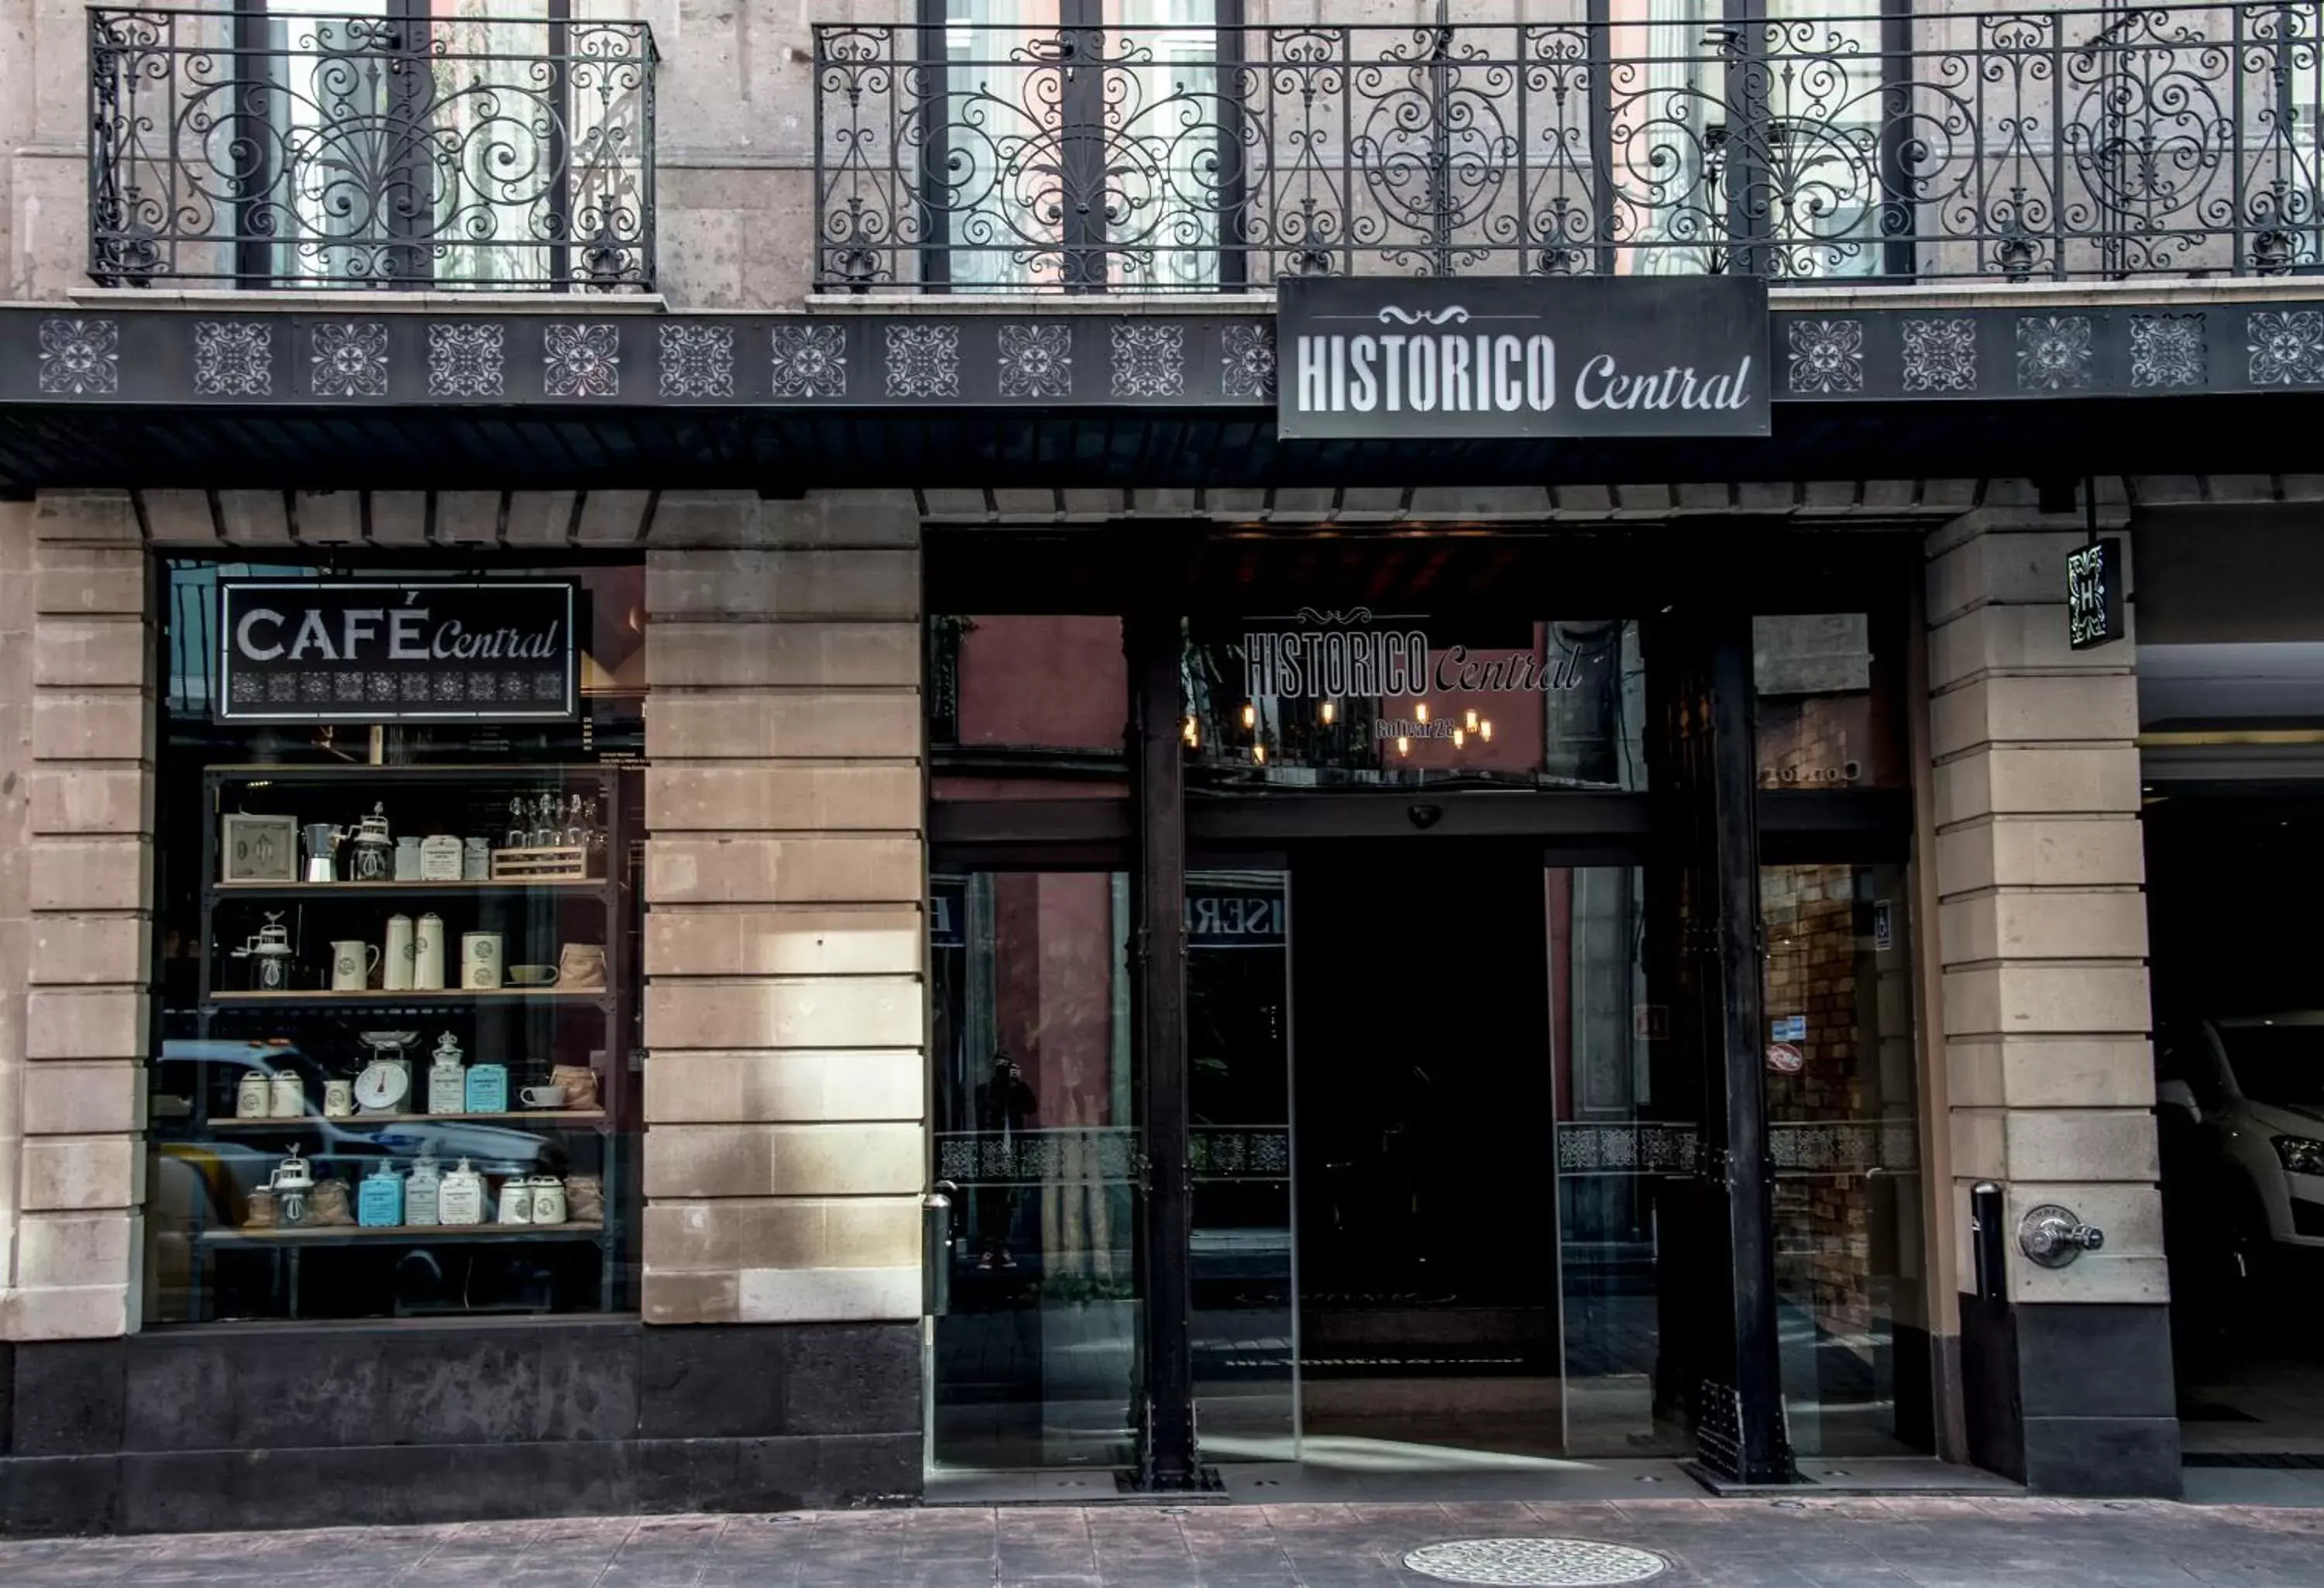 Property building in Historico Central, Fine Coffee Shop & Walking tour included